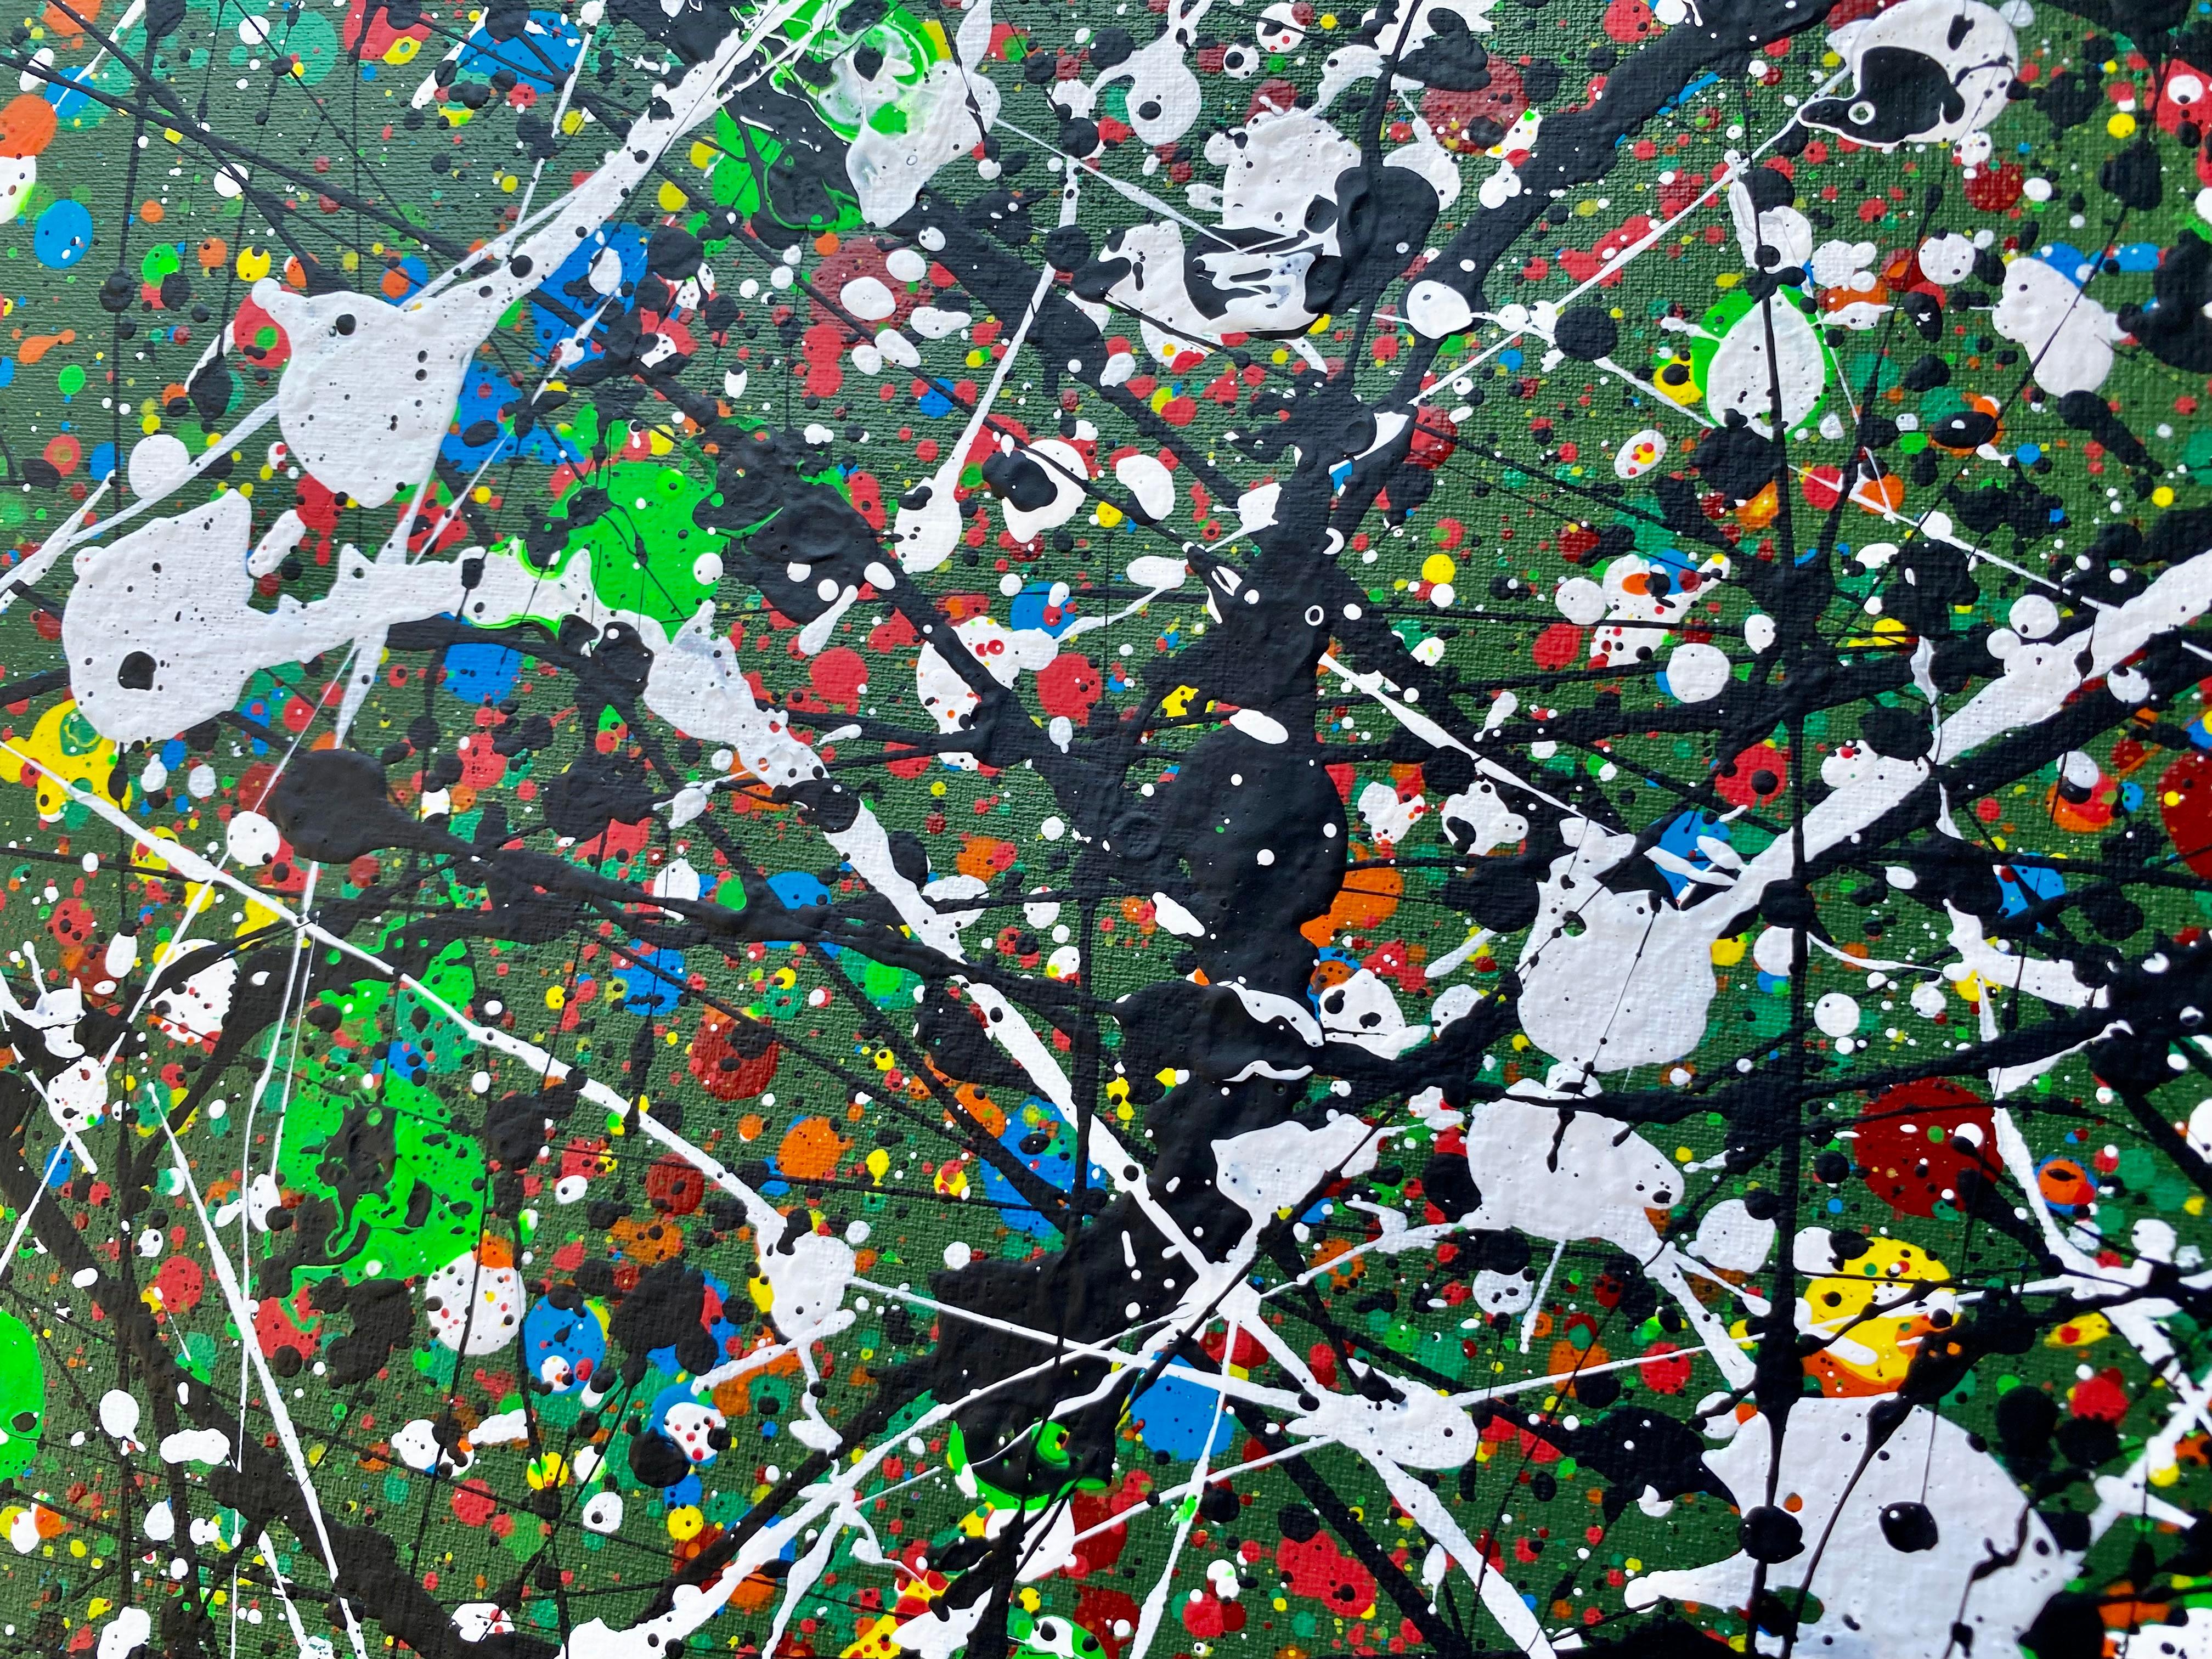 Abstract painting in the main color deep green with elements in white, black, yellow, orange and red.
This abstract painting is lively and expressive.
Abstract minimalism paired with expressionism.

This painting depicted field, water, river,